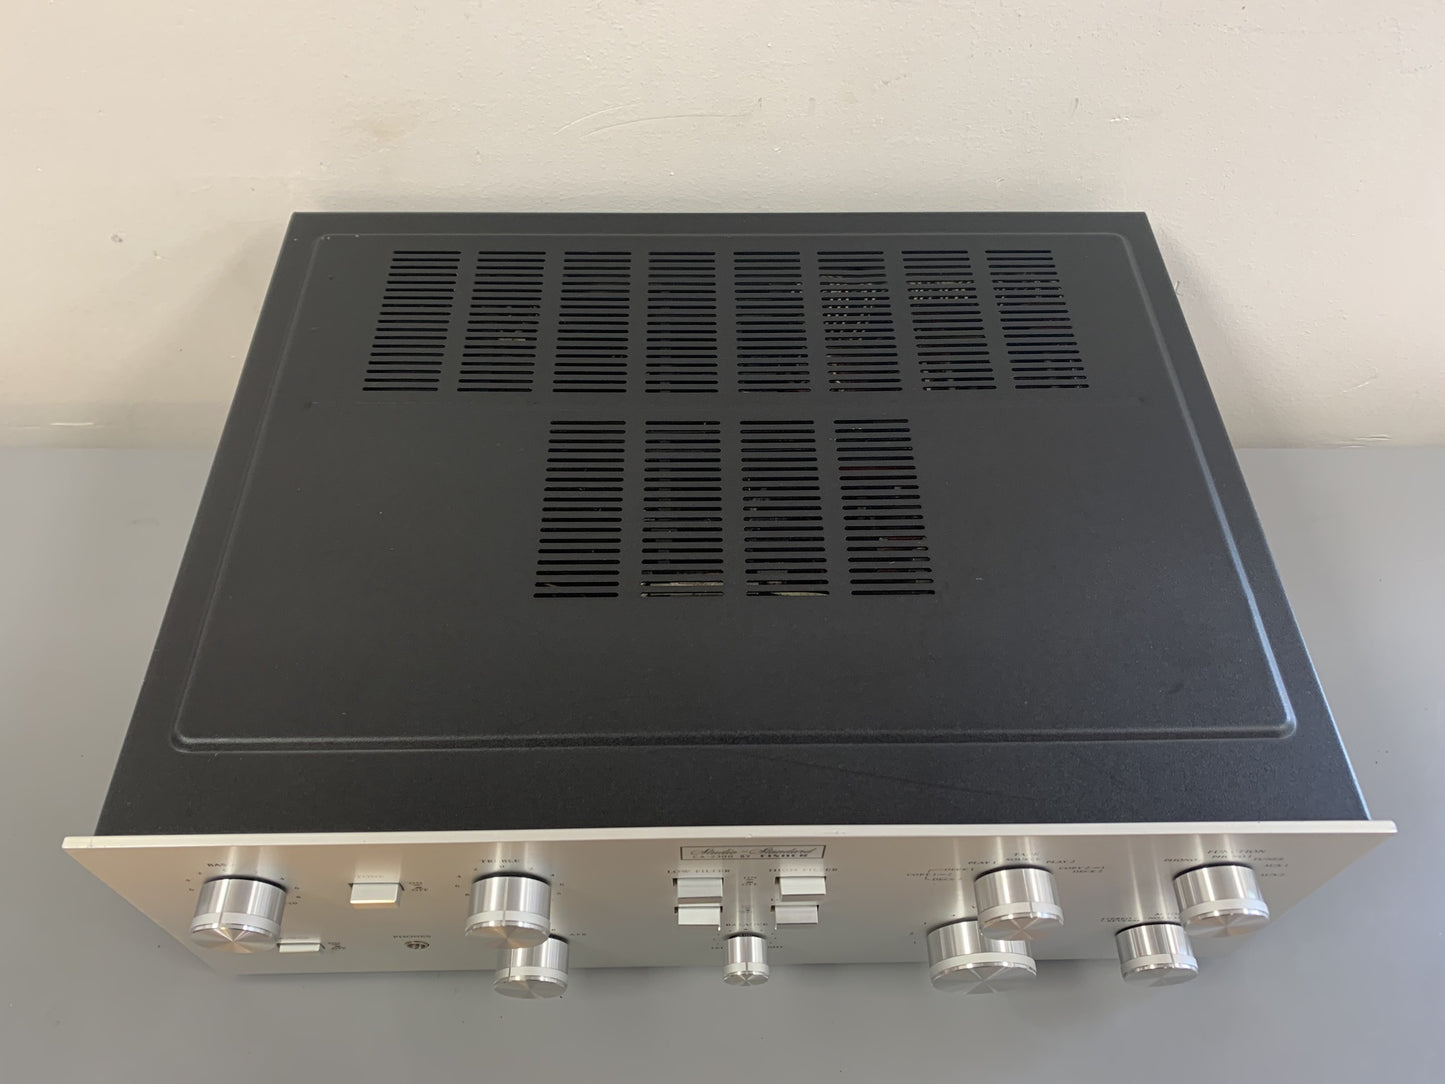 Fisher CA-2300 Integrated Amplifier * 1977 * 40W RMS